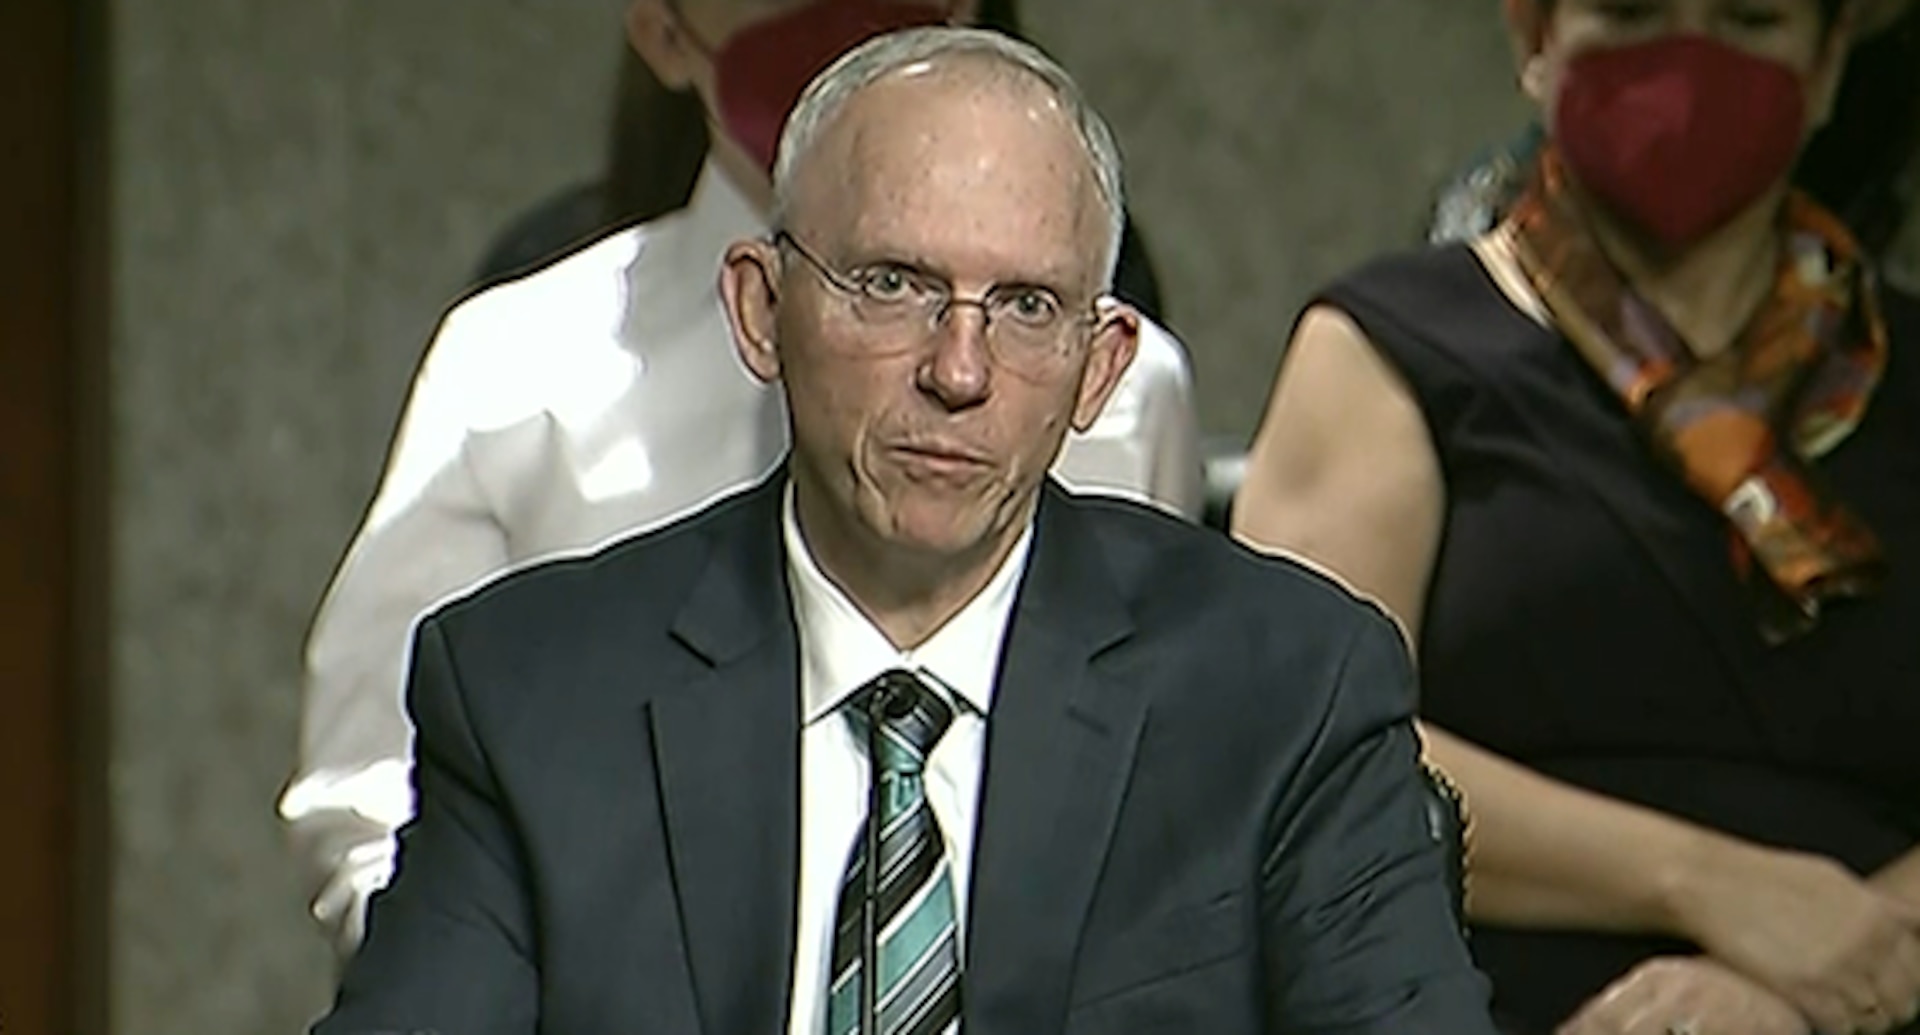 Screen capture of Nickolas Guertin giving testimony from https://www.dvidshub.net/video/818197/senate-armed-services-committee-holds-hearing-nominations